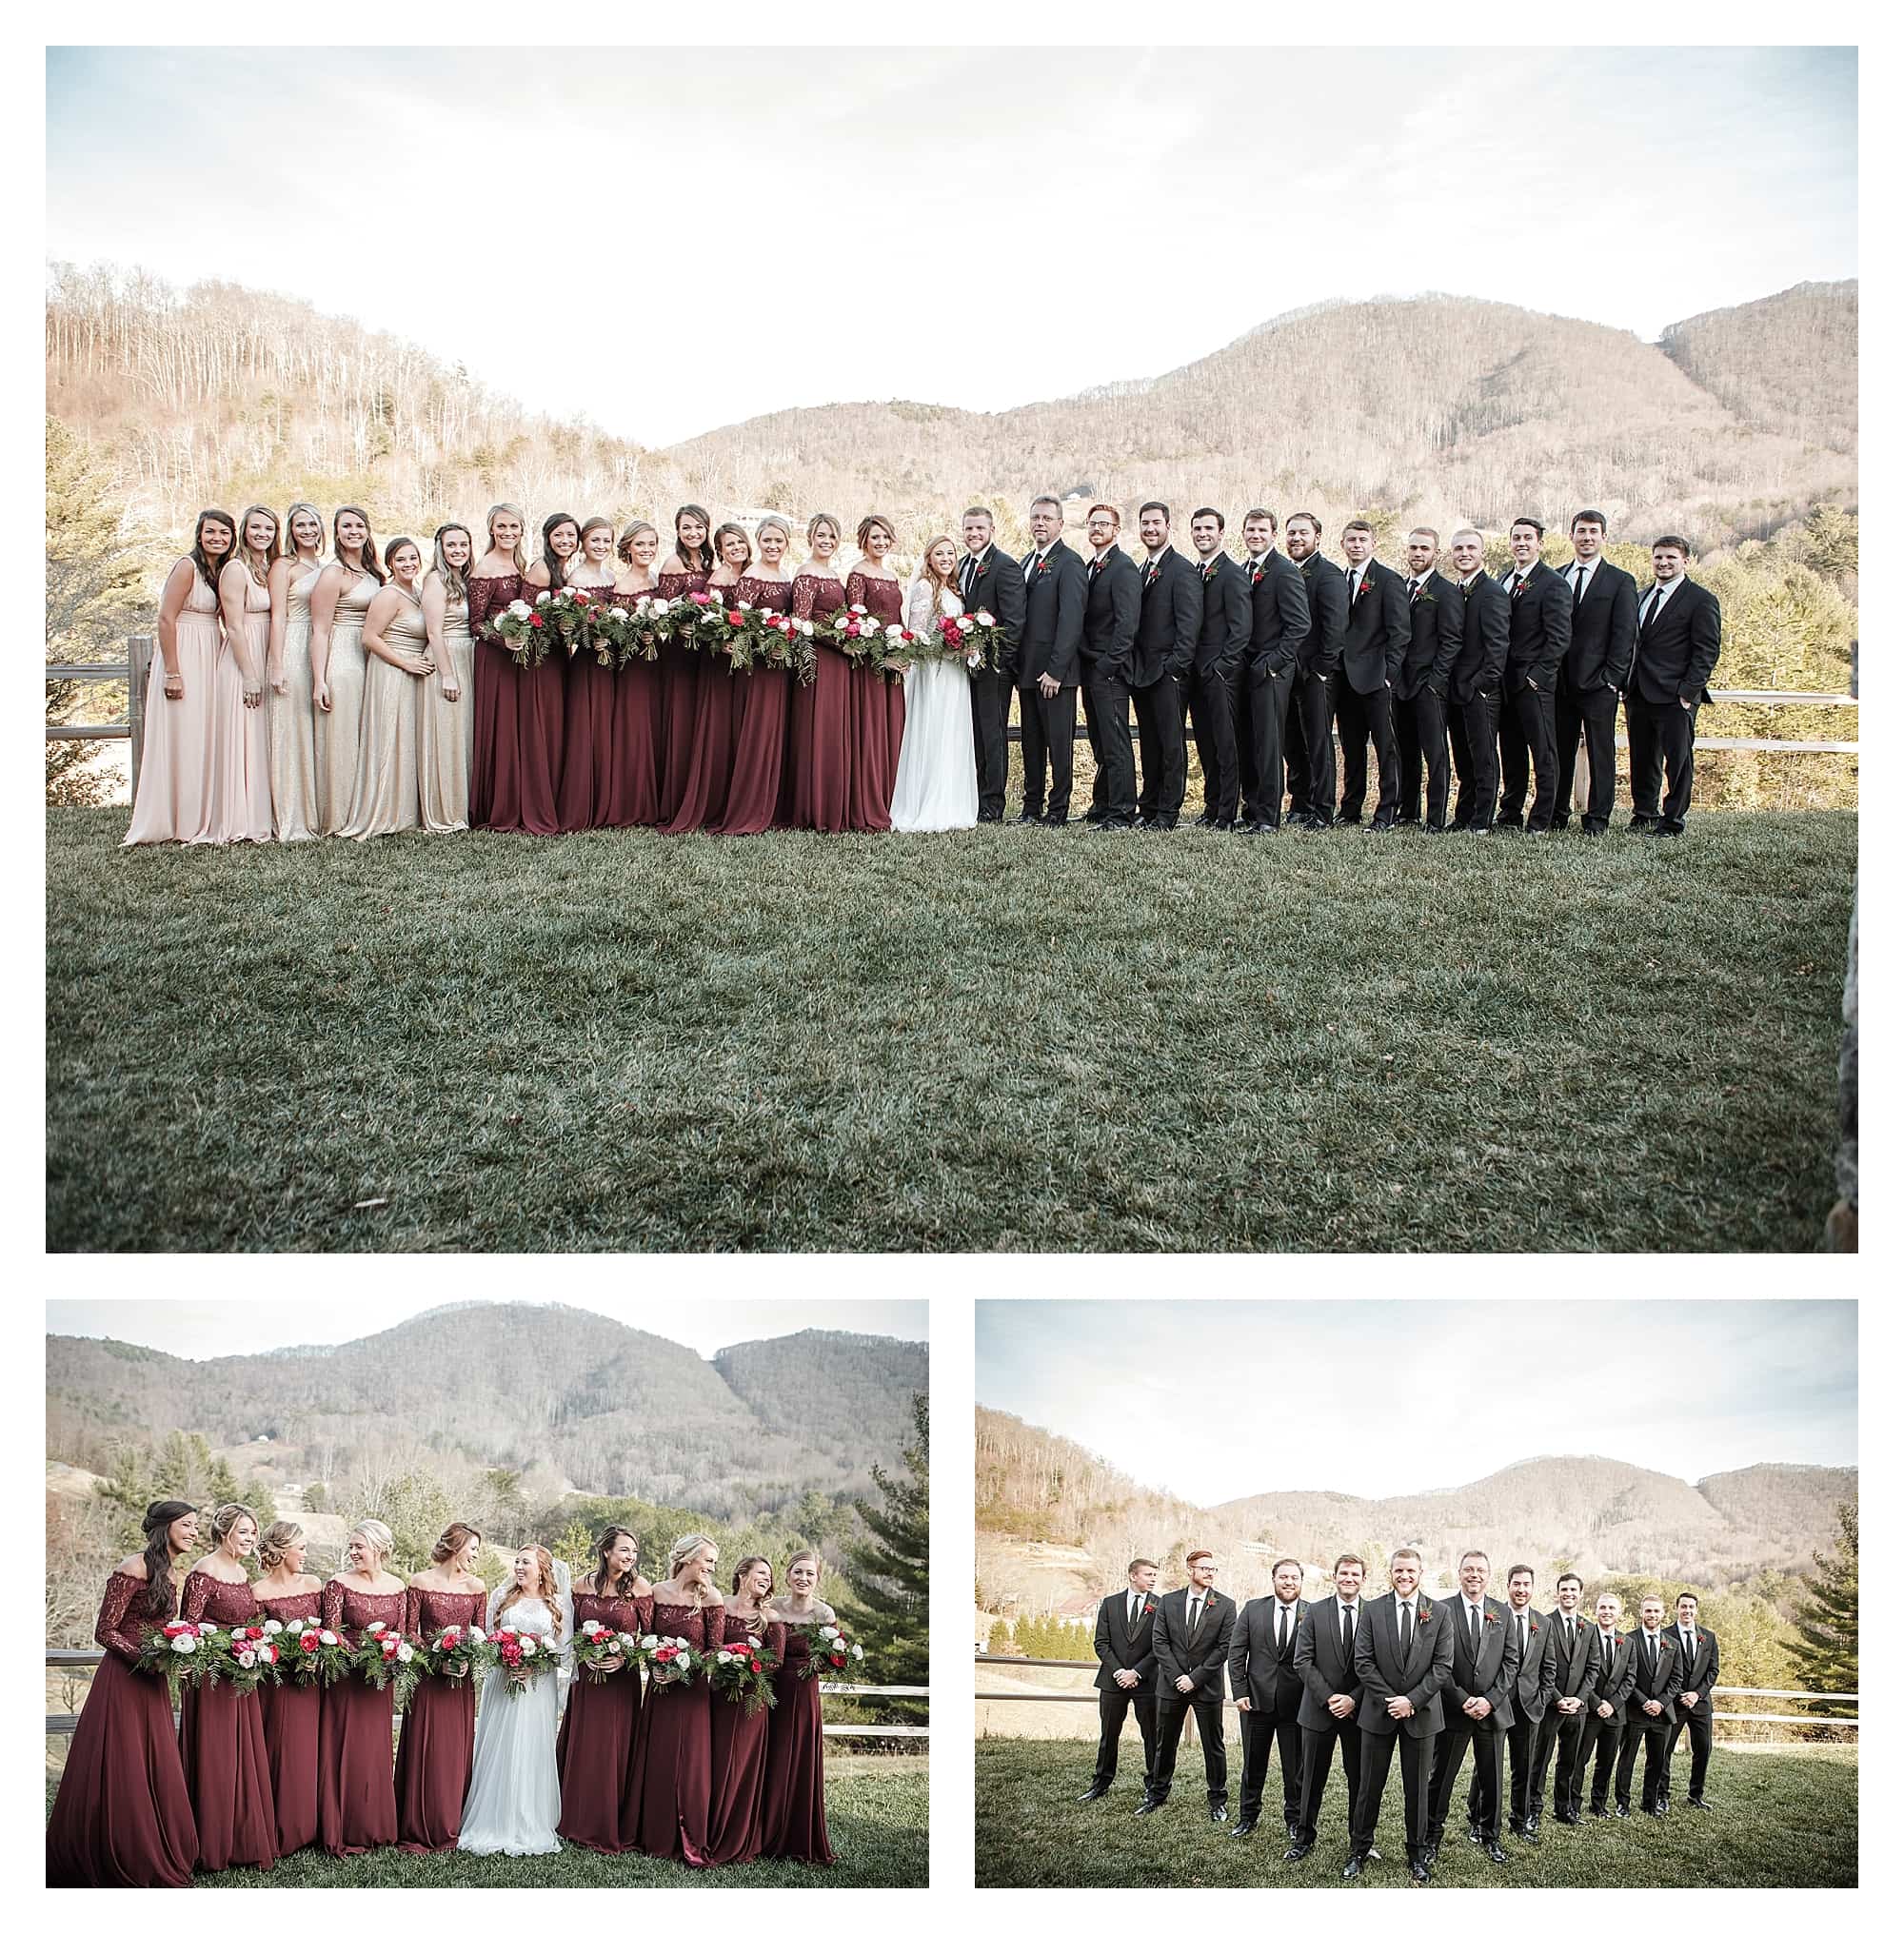 Large Bridal party with mountains in the background.